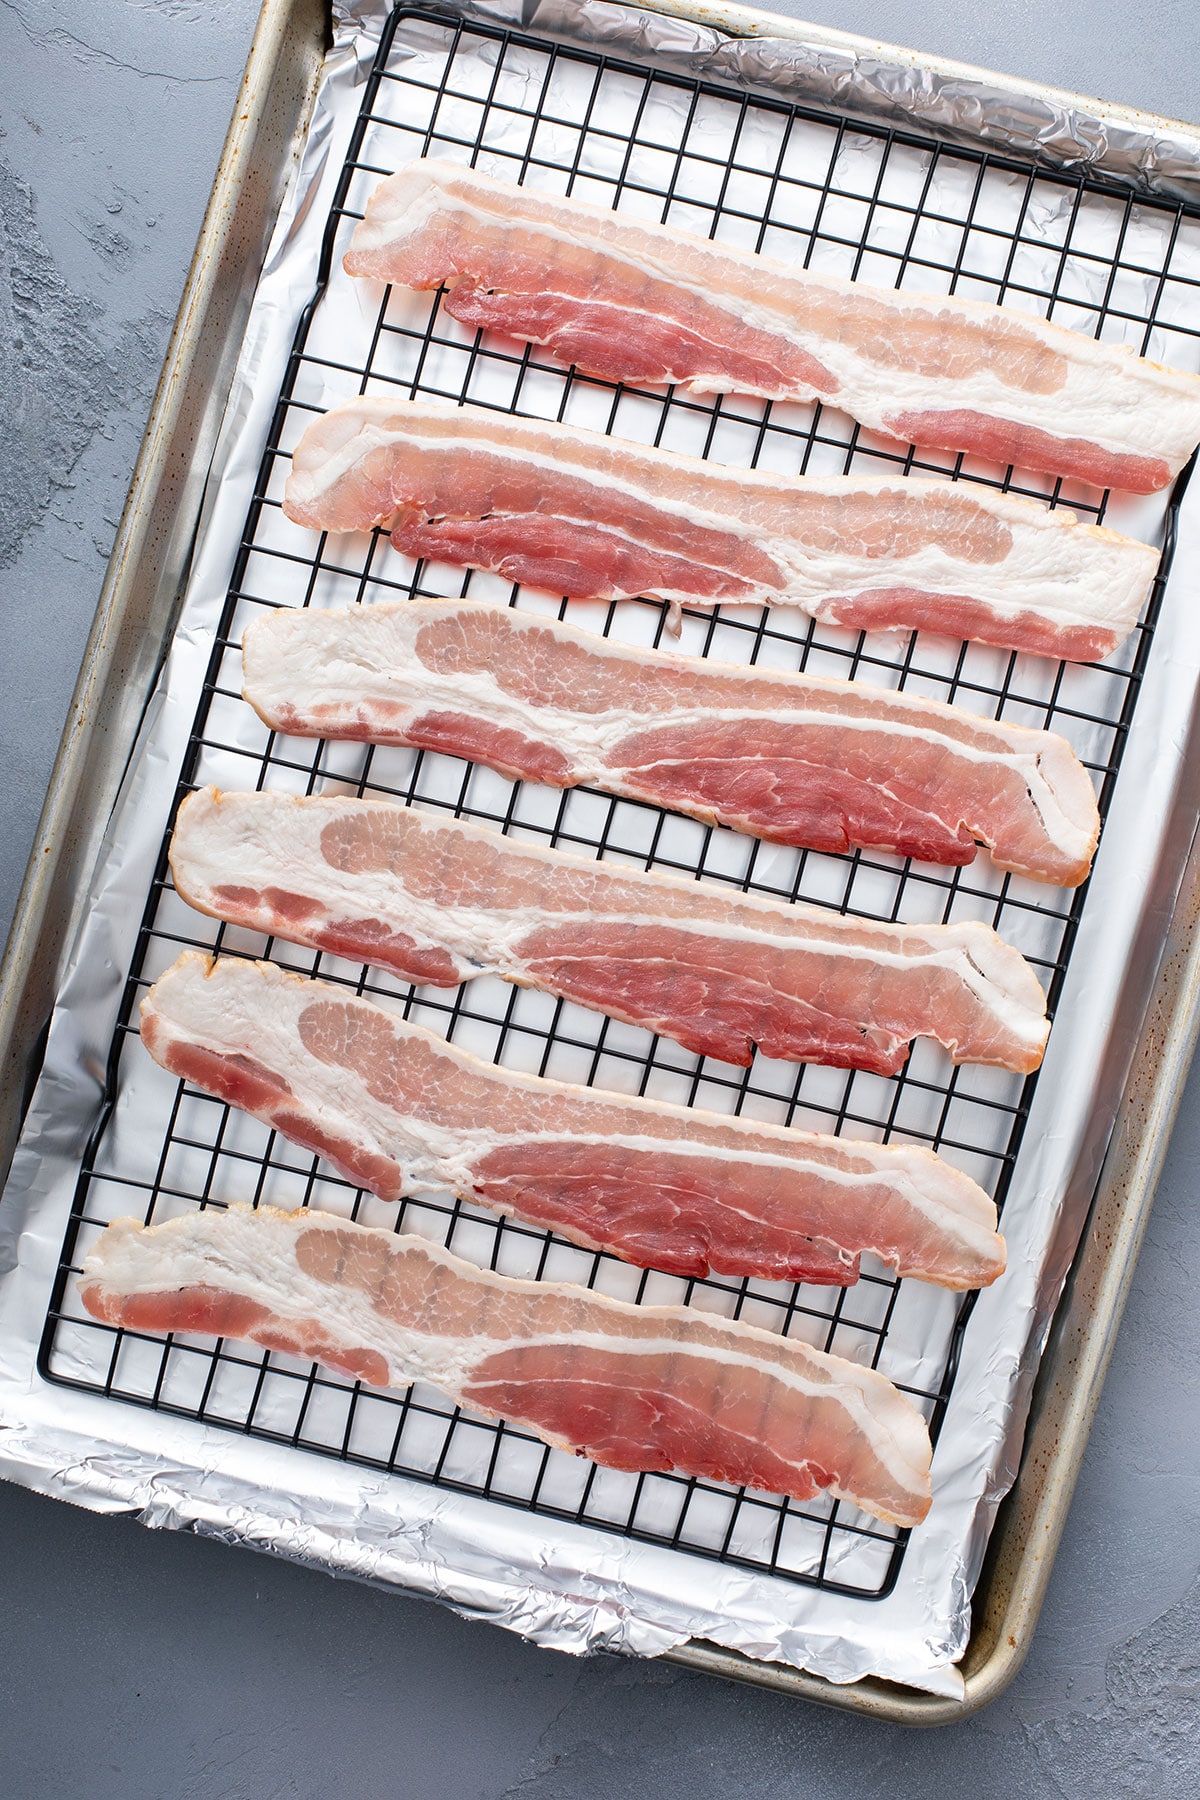 How To Cook Bacon in The Oven - Lemon Blossoms